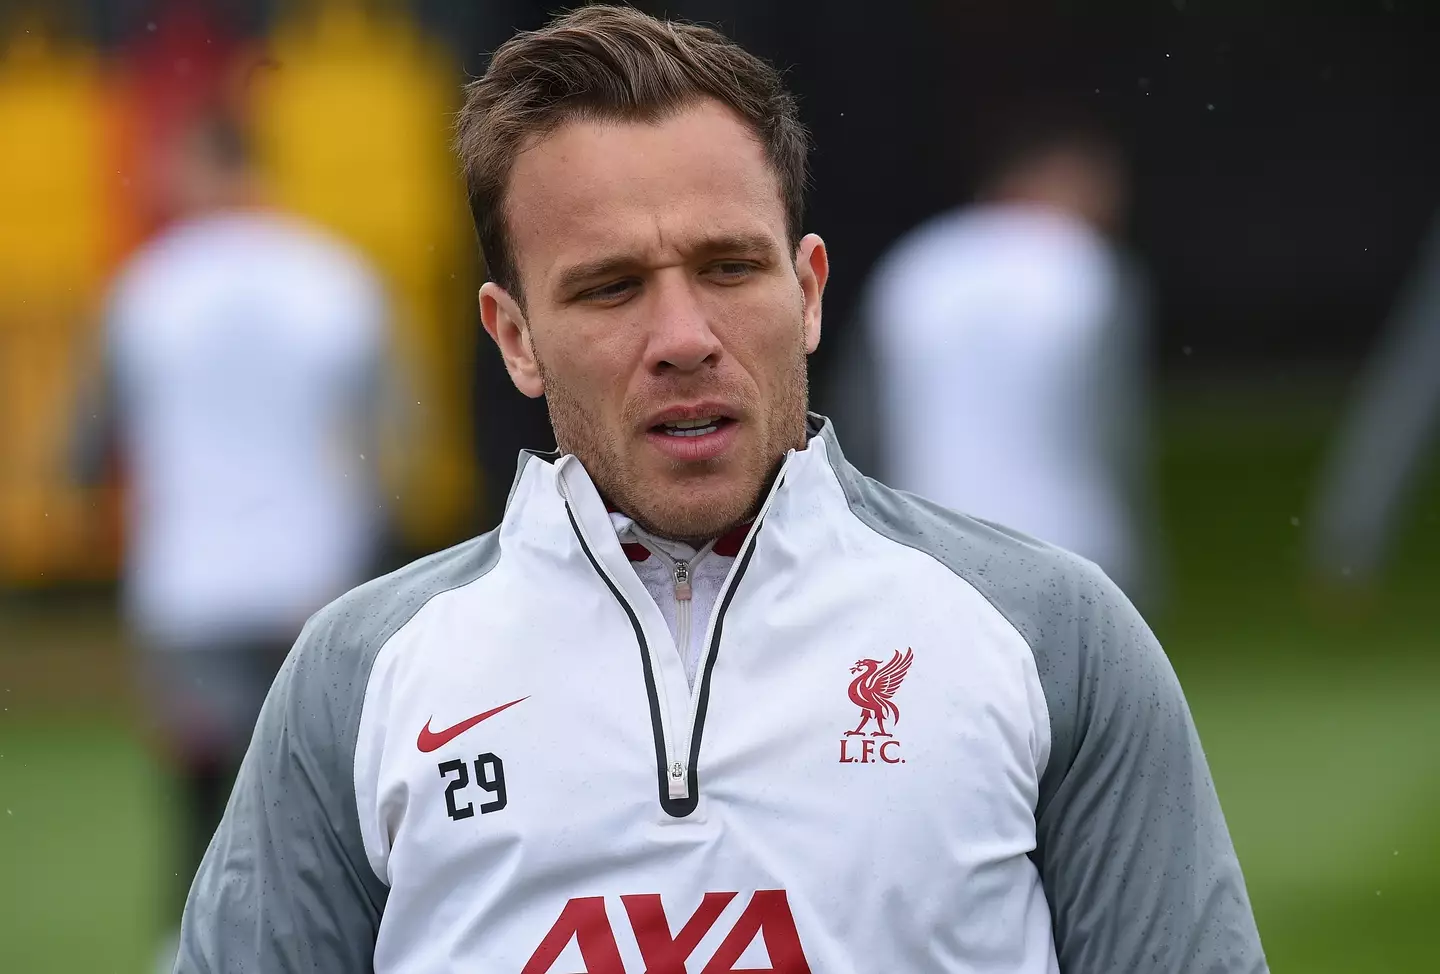 Arthur played just 13 minutes for Liverpool (Getty)